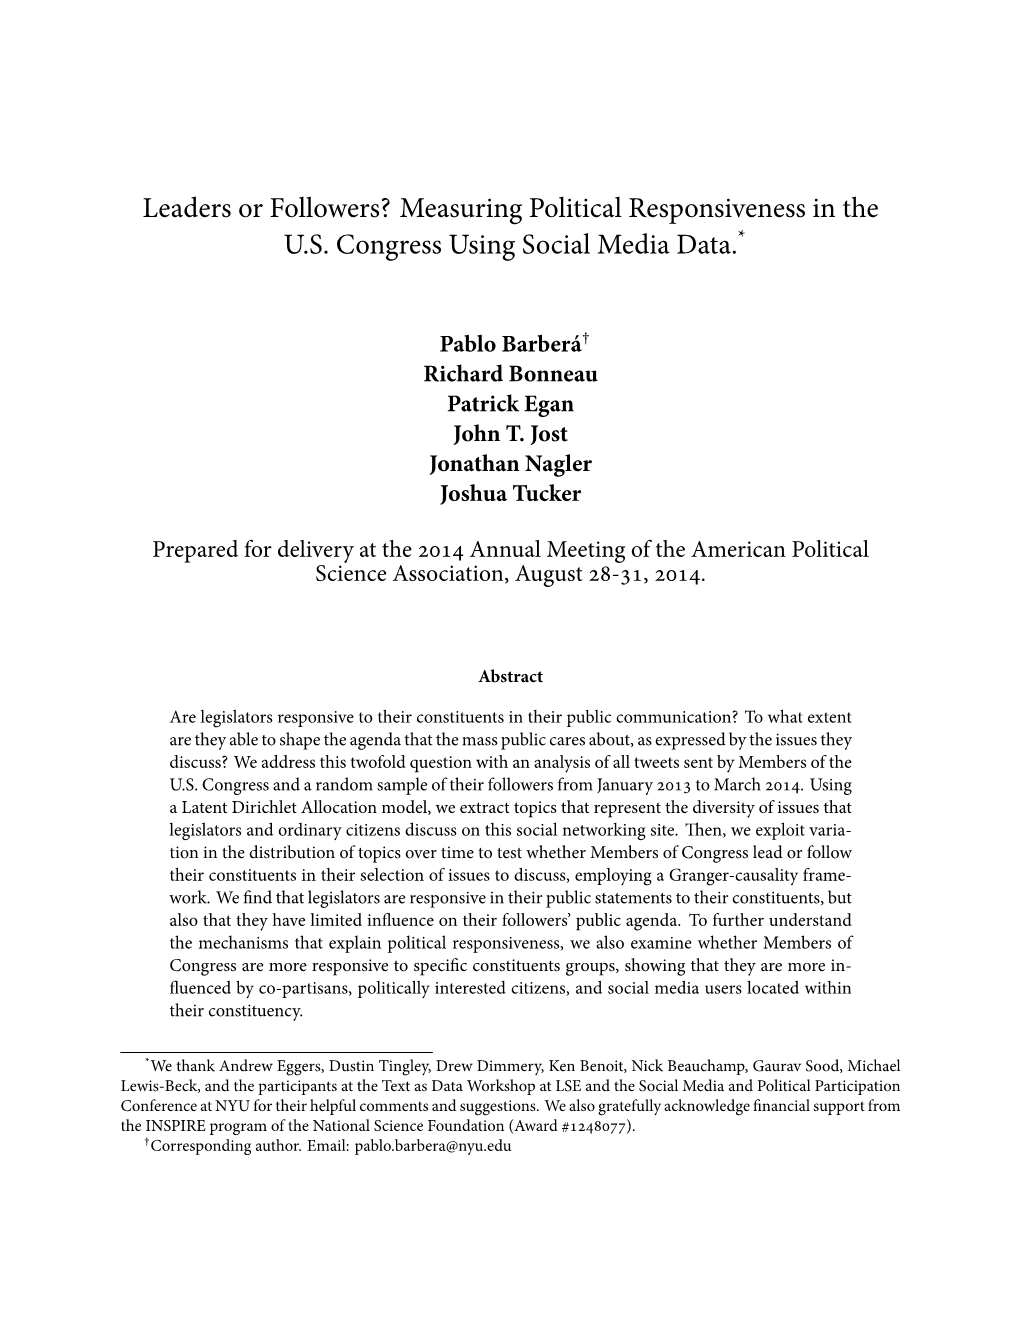 Measuring Political Responsiveness in the US Congress Using Social